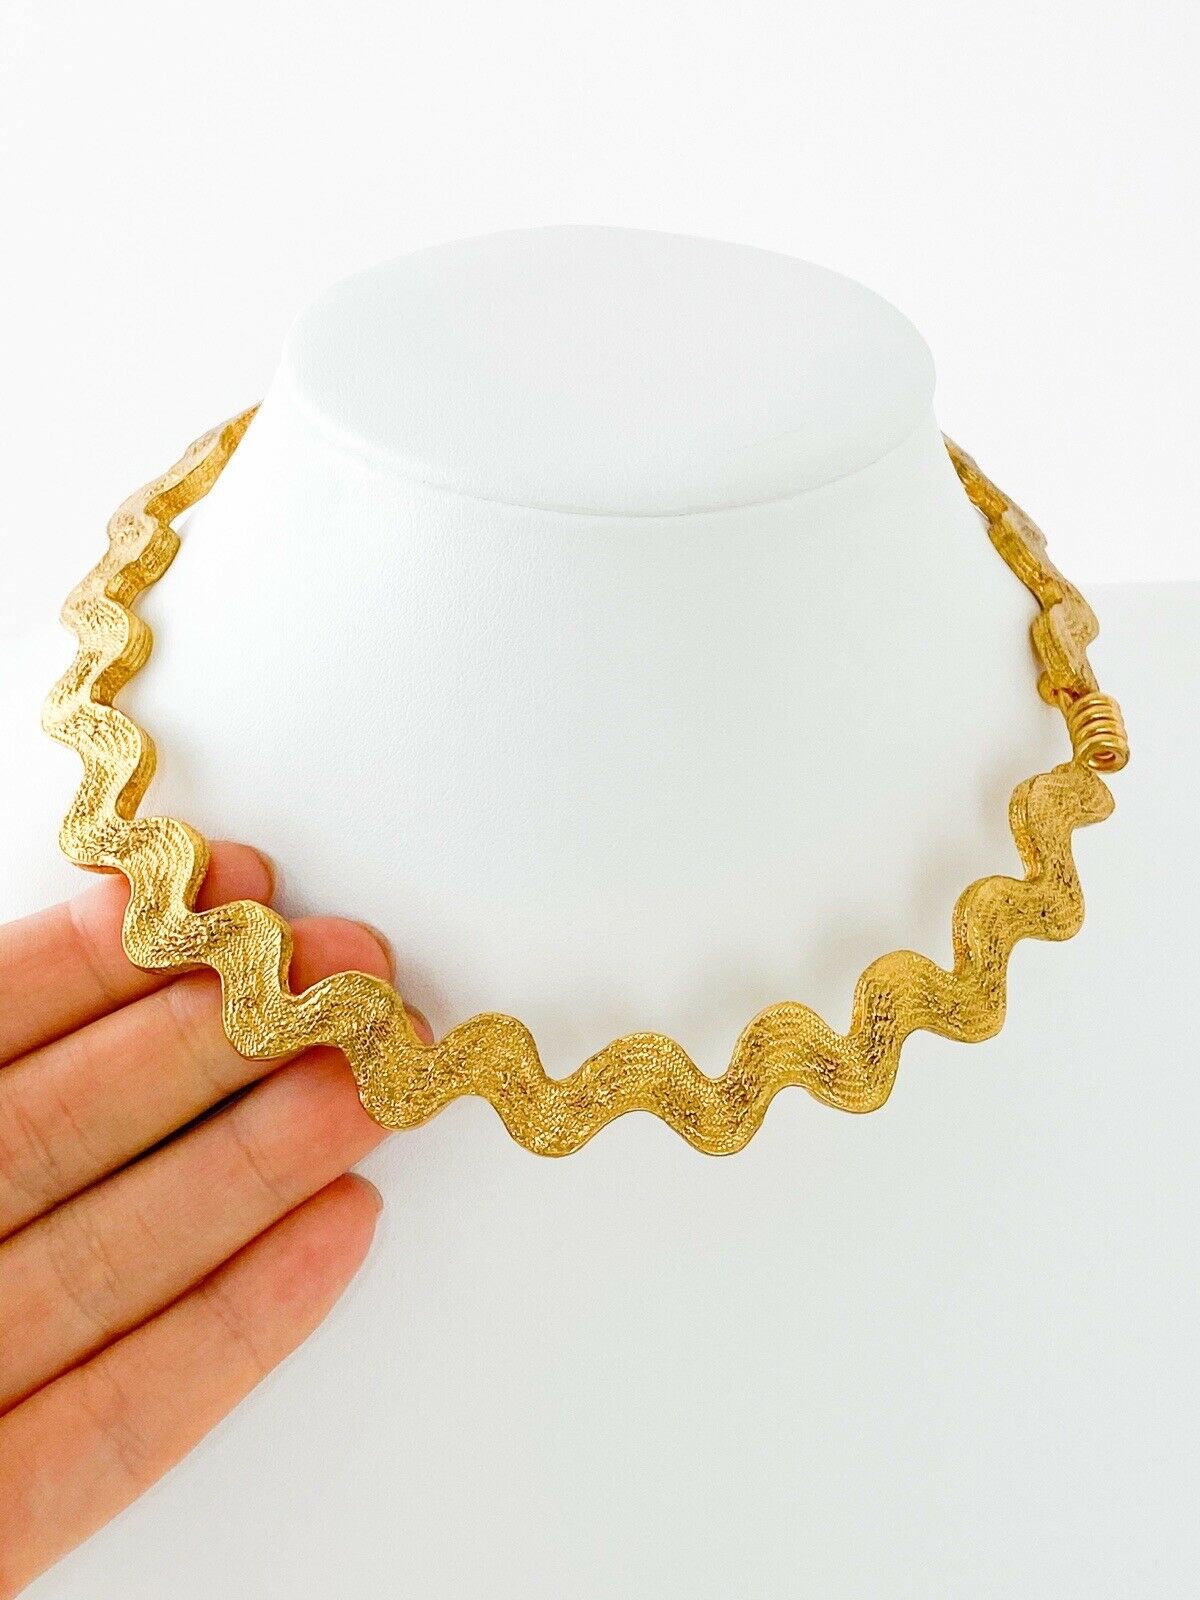 YSL Yves Saint Laurent Vintage Zigzag Textured Choker Necklace Made in France